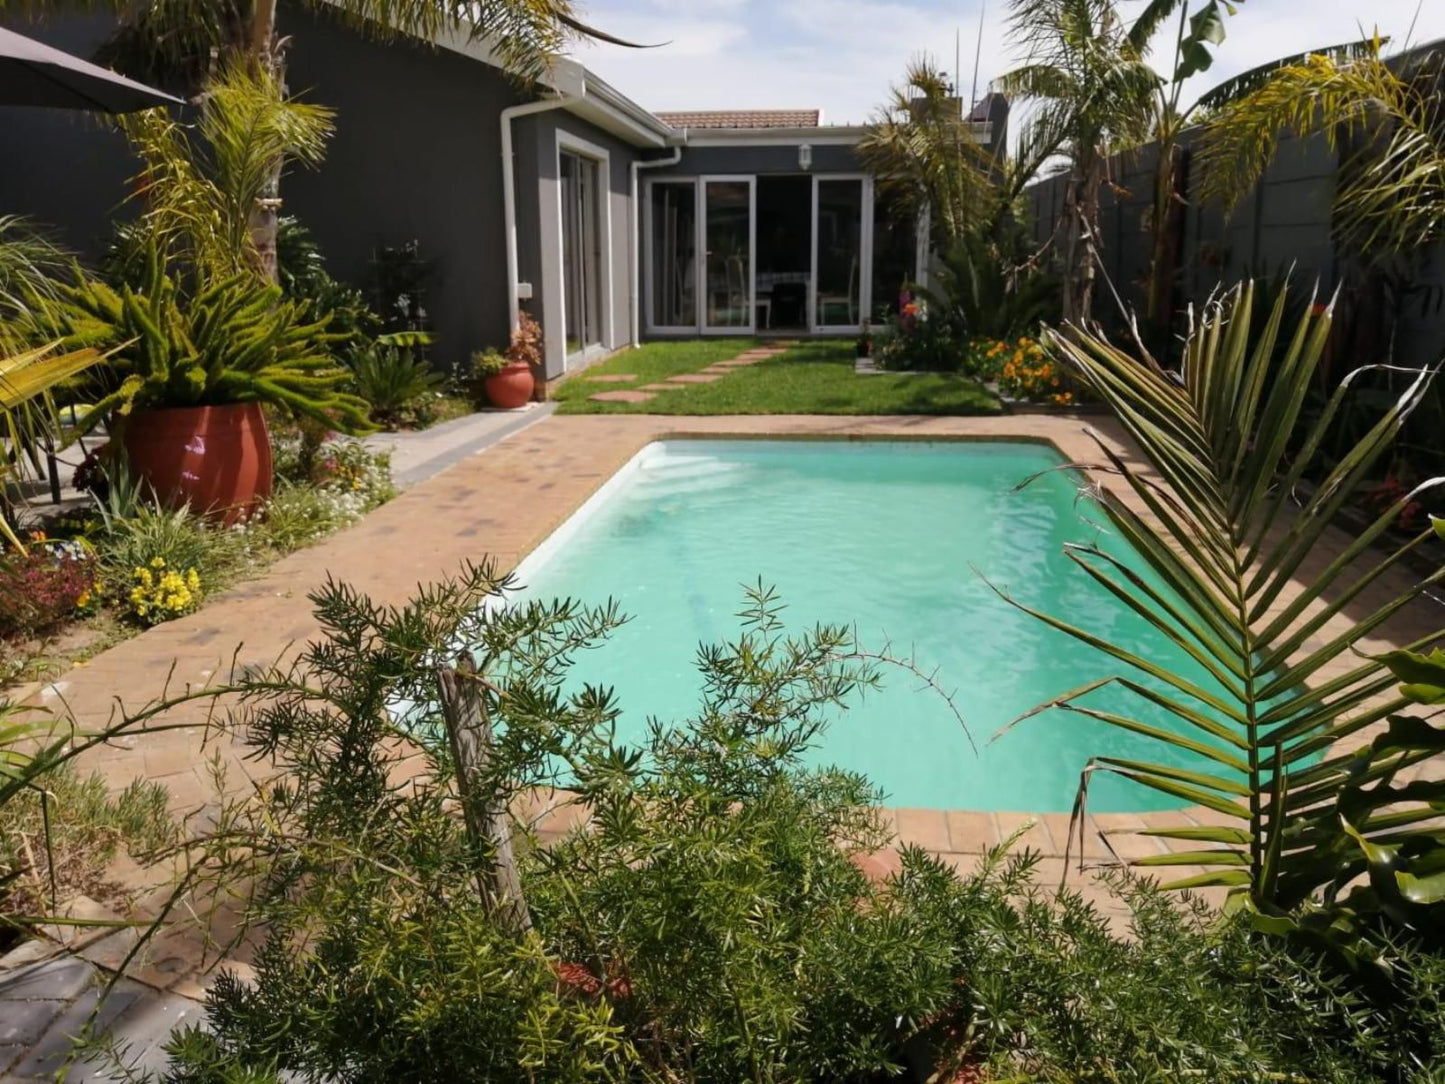 Northern Vine Guesthouse Protea Heights Cape Town Western Cape South Africa House, Building, Architecture, Palm Tree, Plant, Nature, Wood, Garden, Swimming Pool